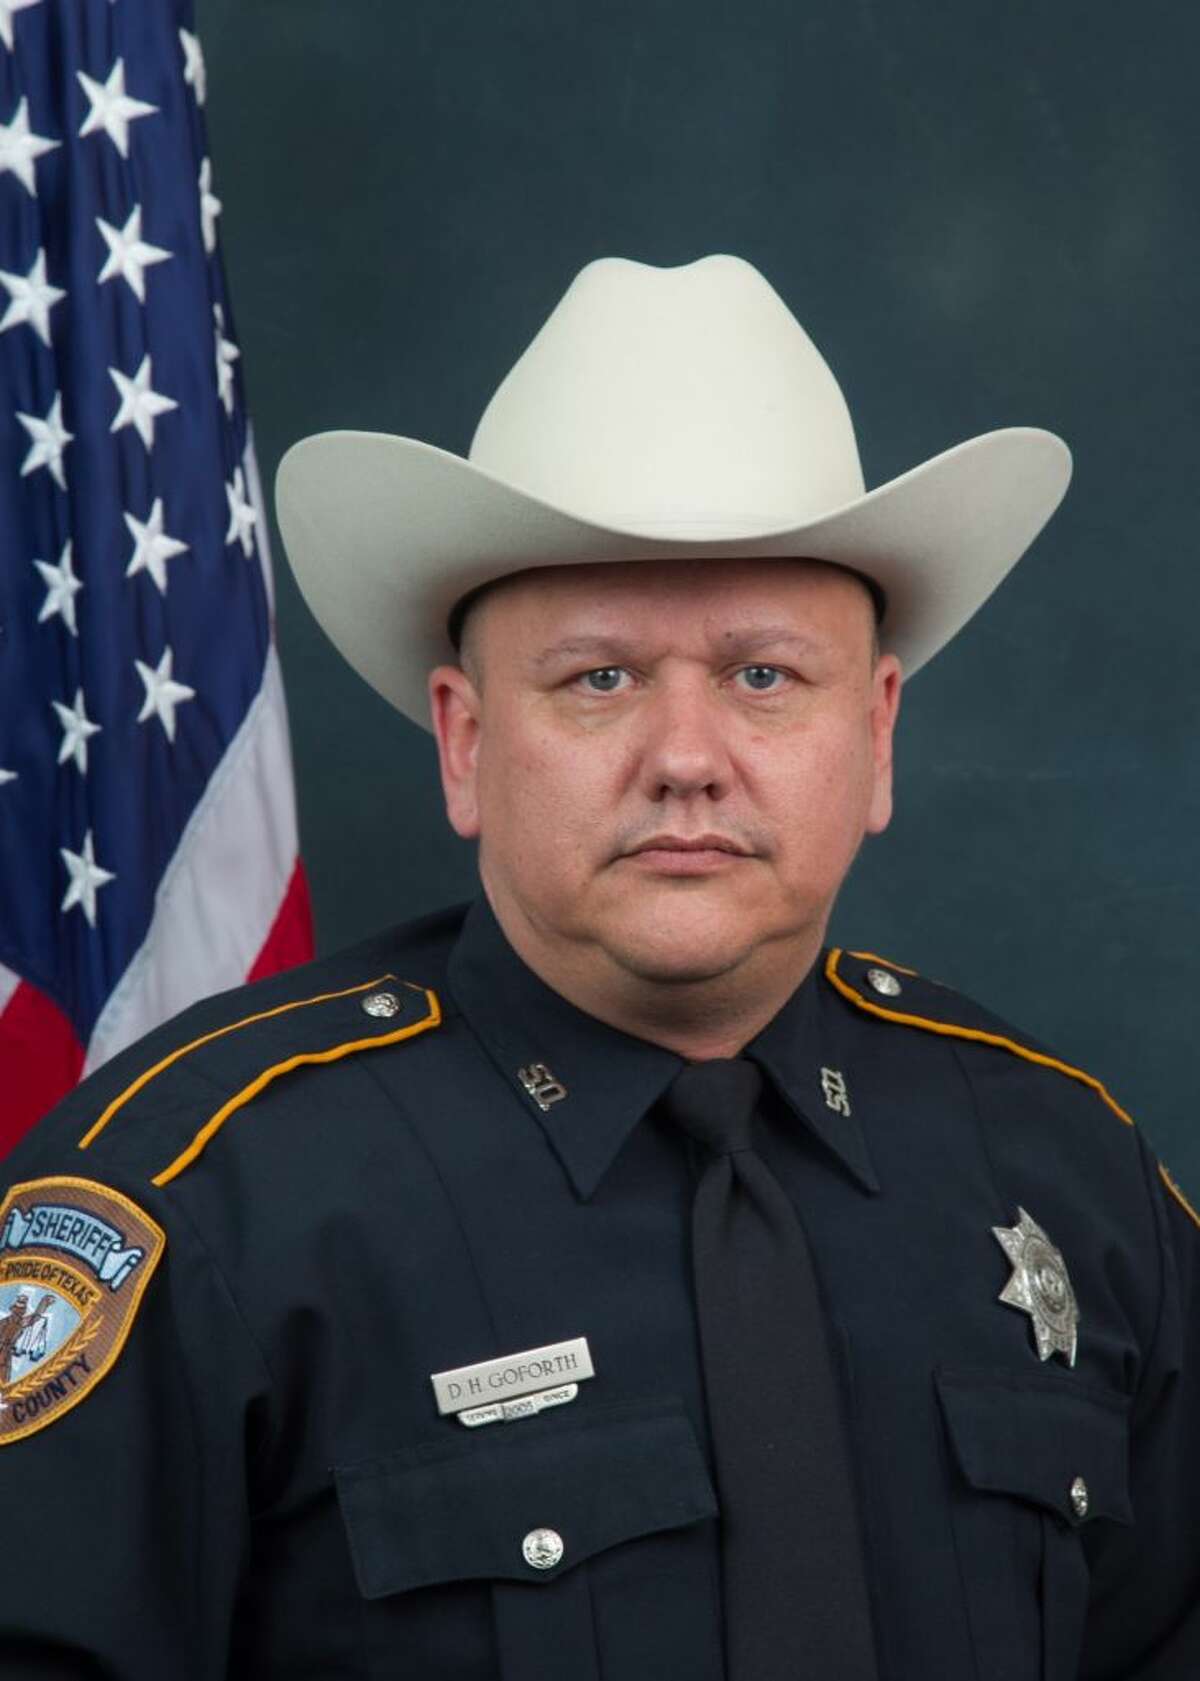 Dep. Darren Goforth, age 47, was fatally shot Aug. 28 at a gas station in Houston. 